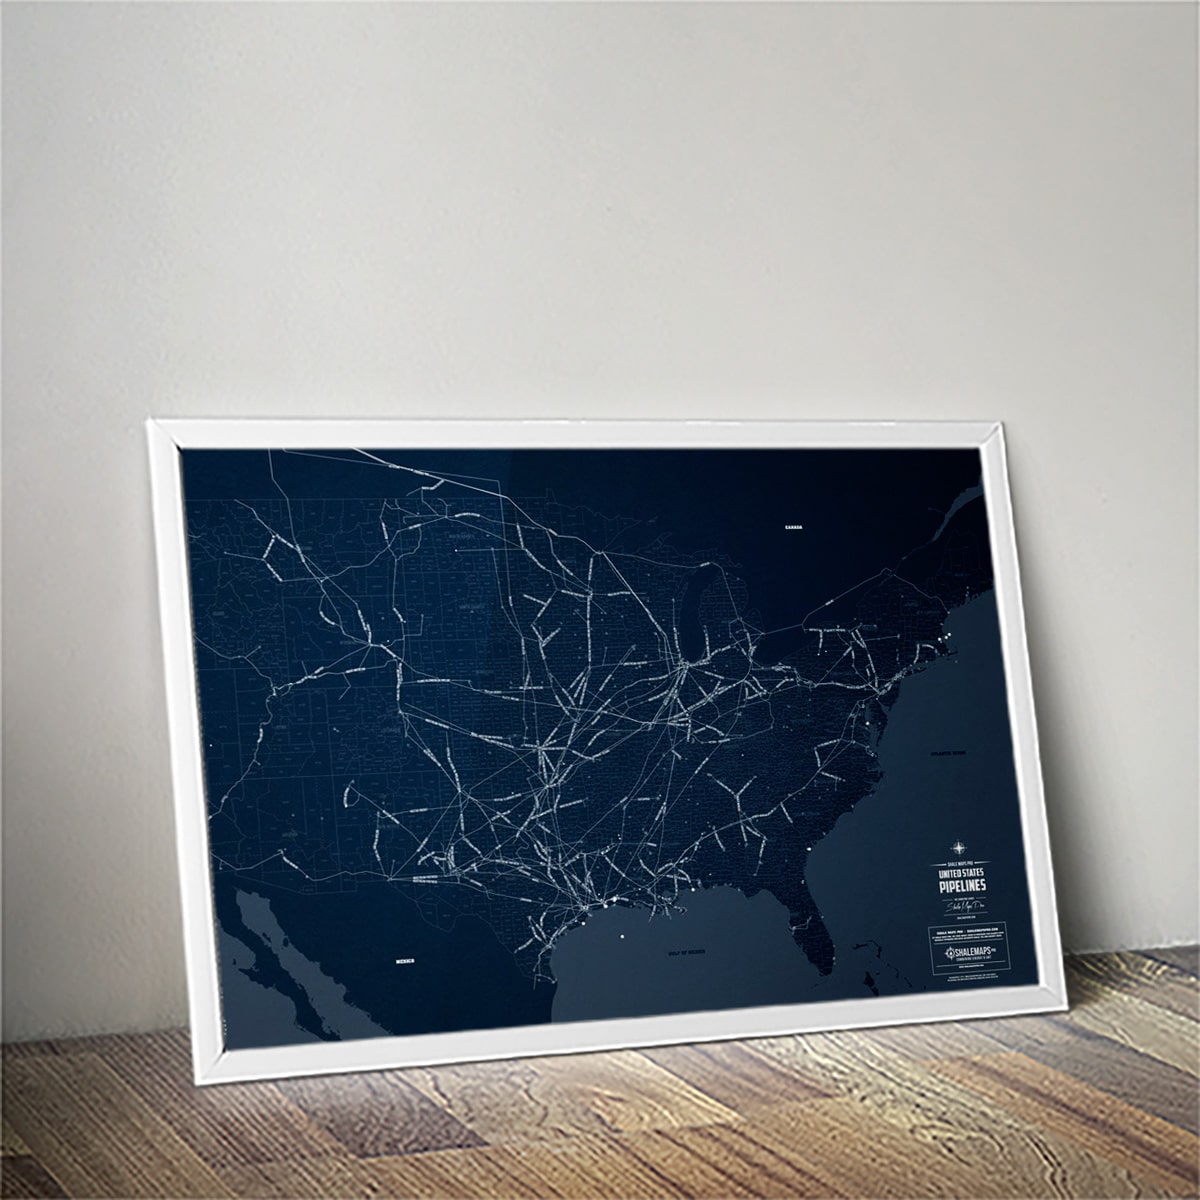 United States Oil & Gas Pipelines Map